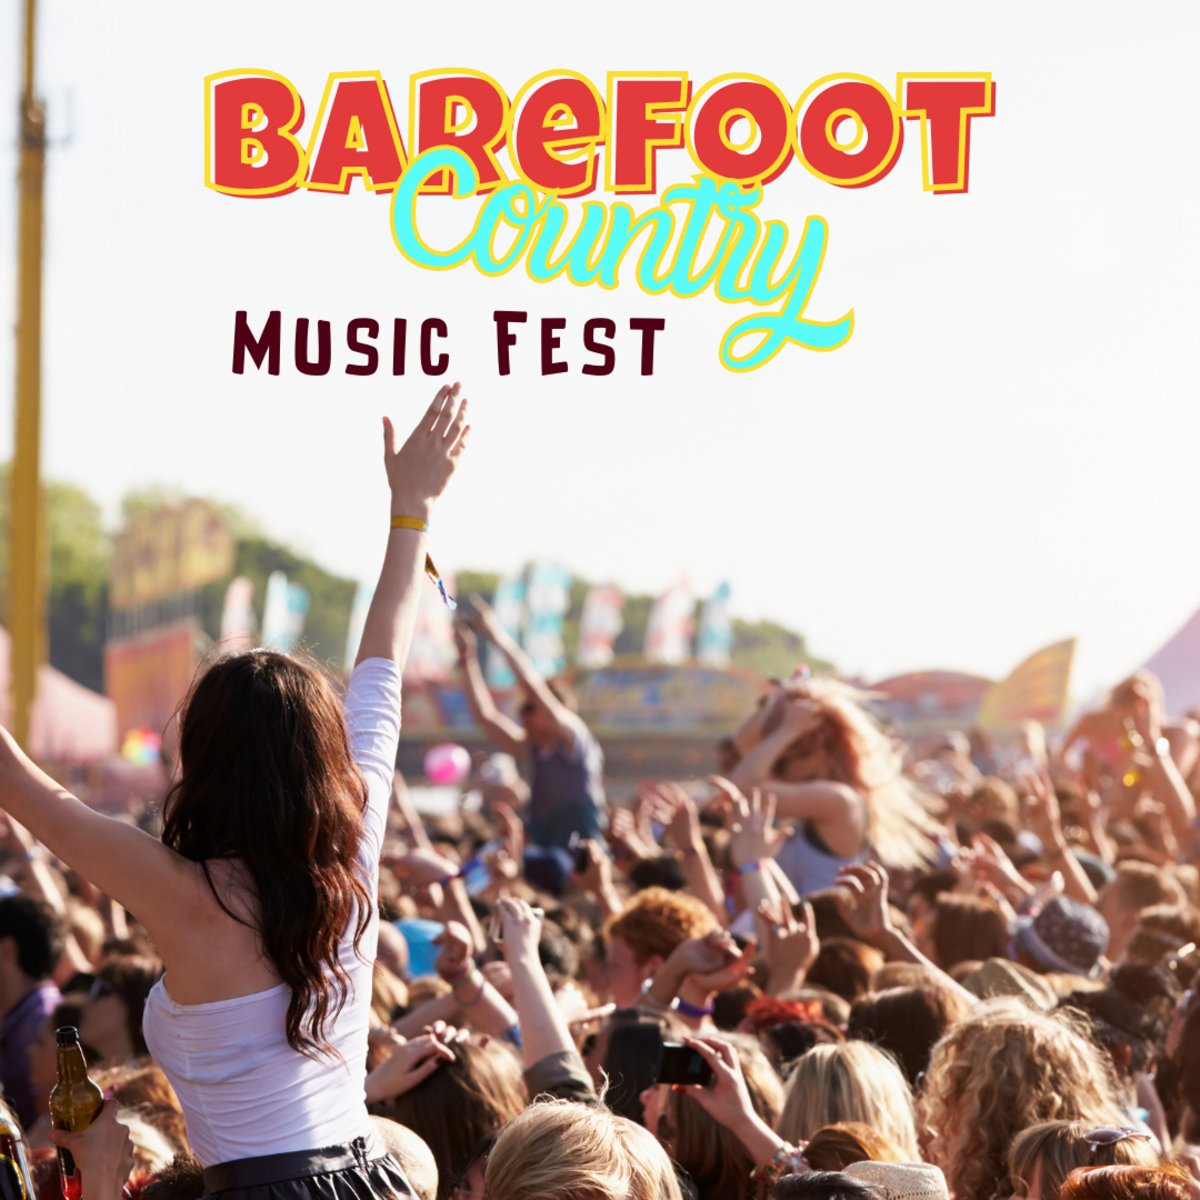 You don't want to miss out on the #BarefootCountryMusicFestival in #Wildwood! This is one of the best music festivals with a star-studded lineup featuring #BlakeShelton, #KidRock, Lainey Wilson, and others. Grab your tickets for the 15th -18th! bit.ly/45fzU22